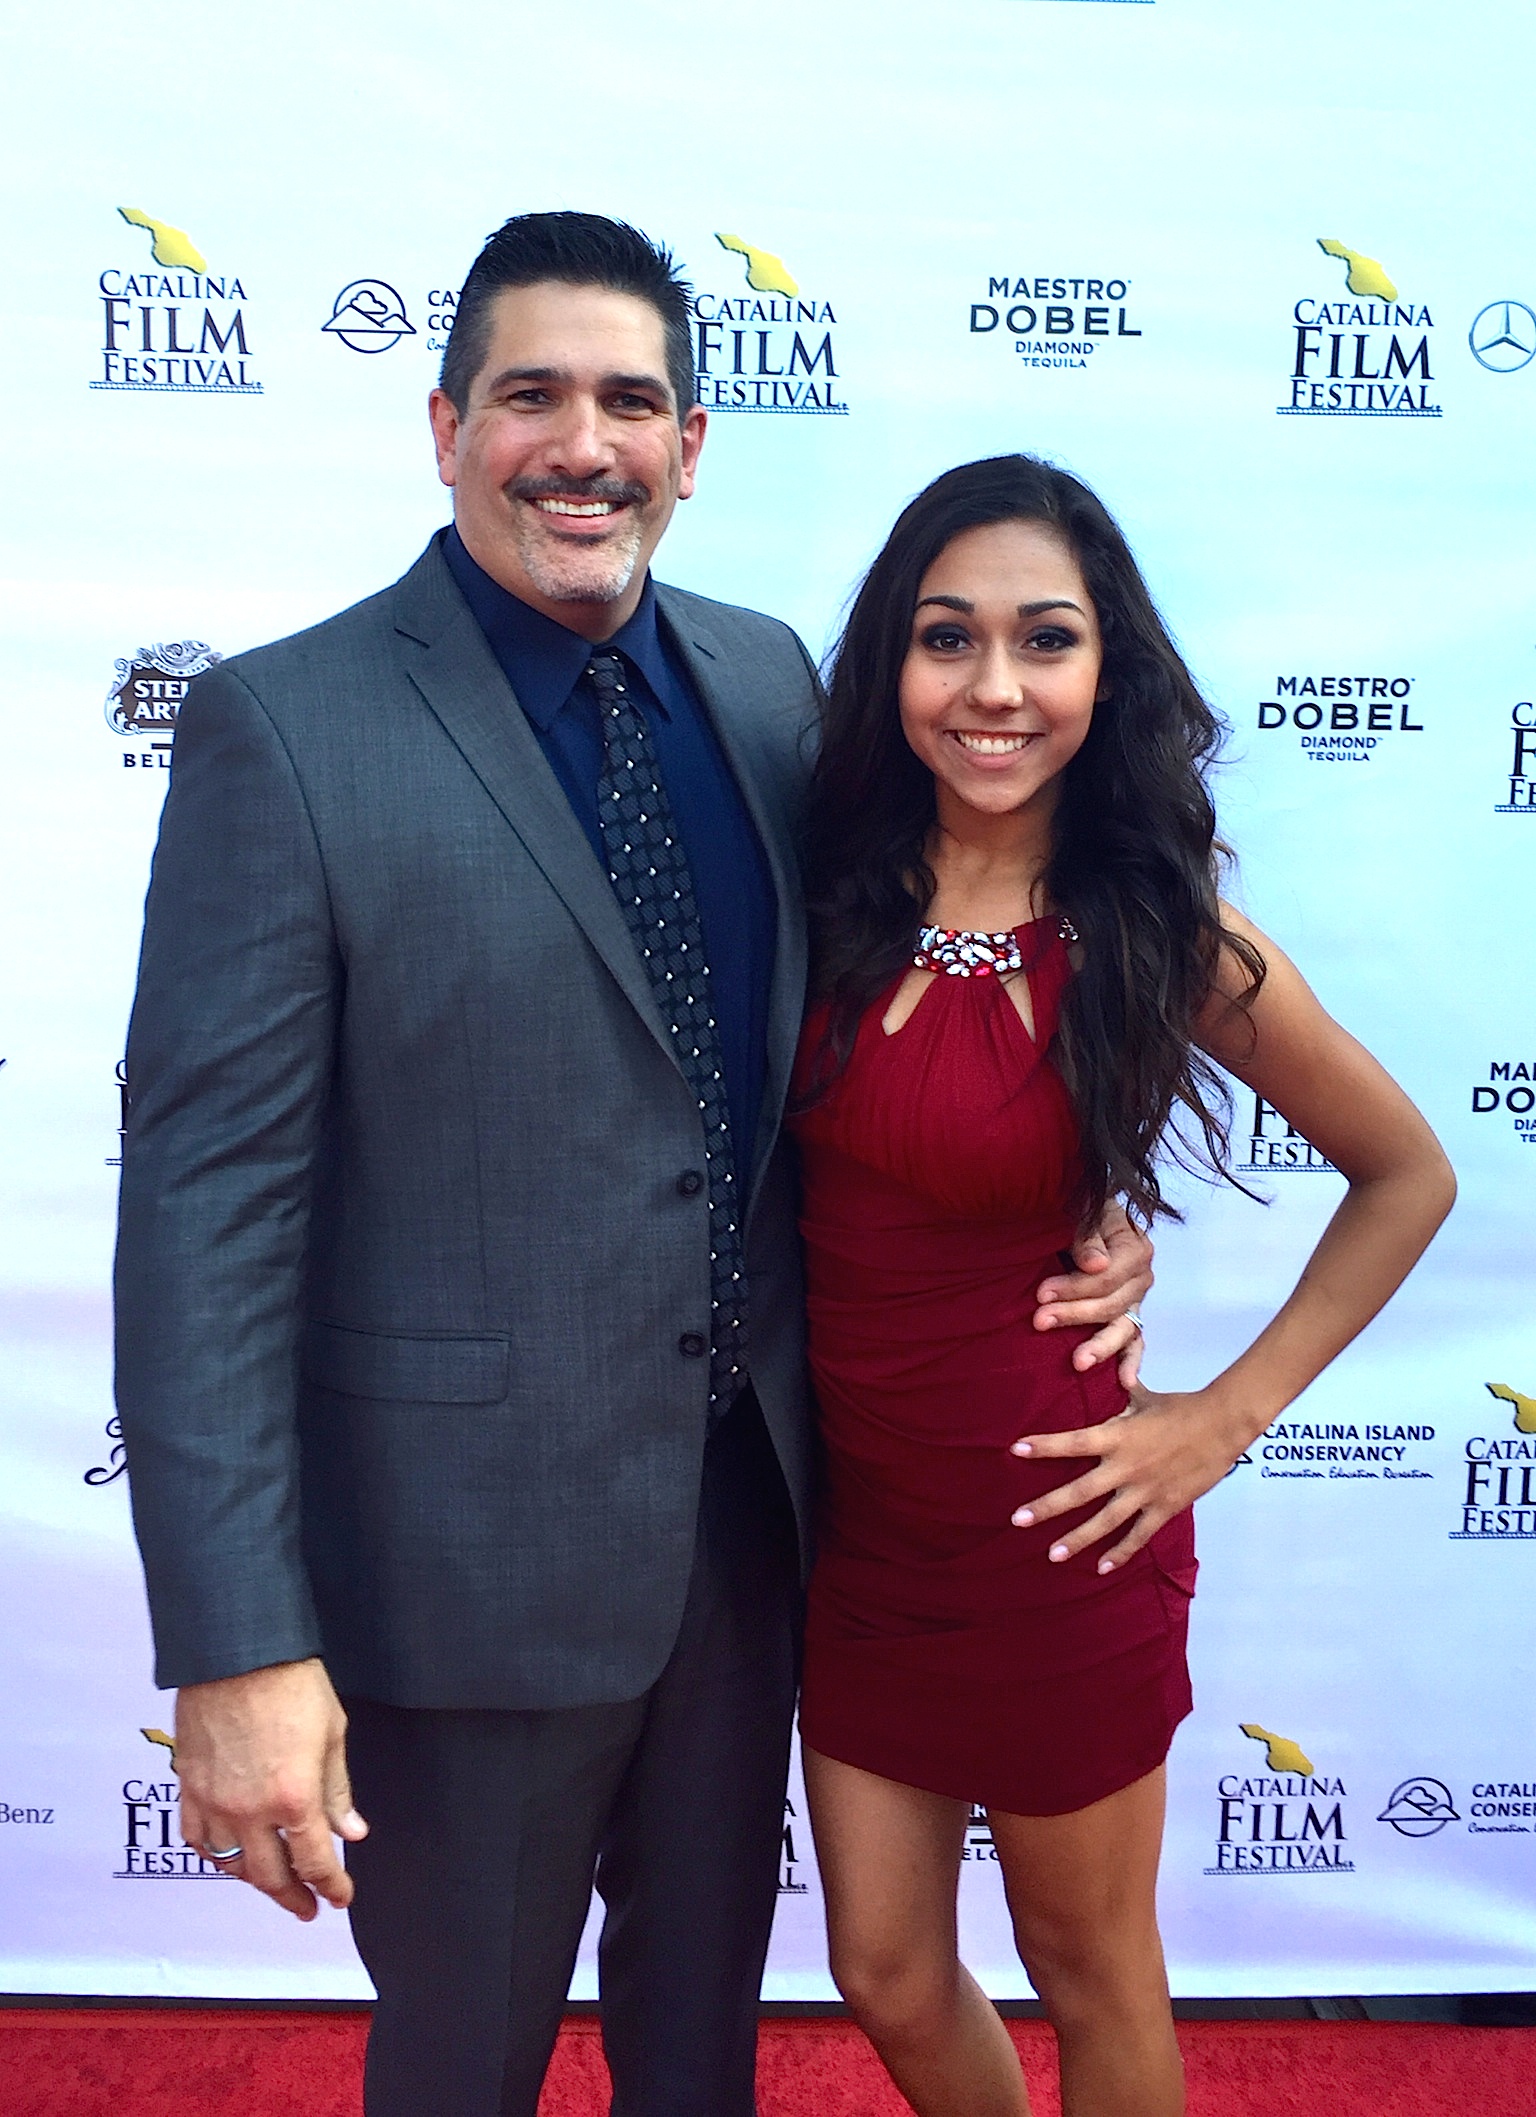 Brooklyn Haley with Thomas Haley at the CATALINA FILM FESTIVAL for the screening of THIRTEEN, a WES CRAVEN OFFICIAL SELECTION.